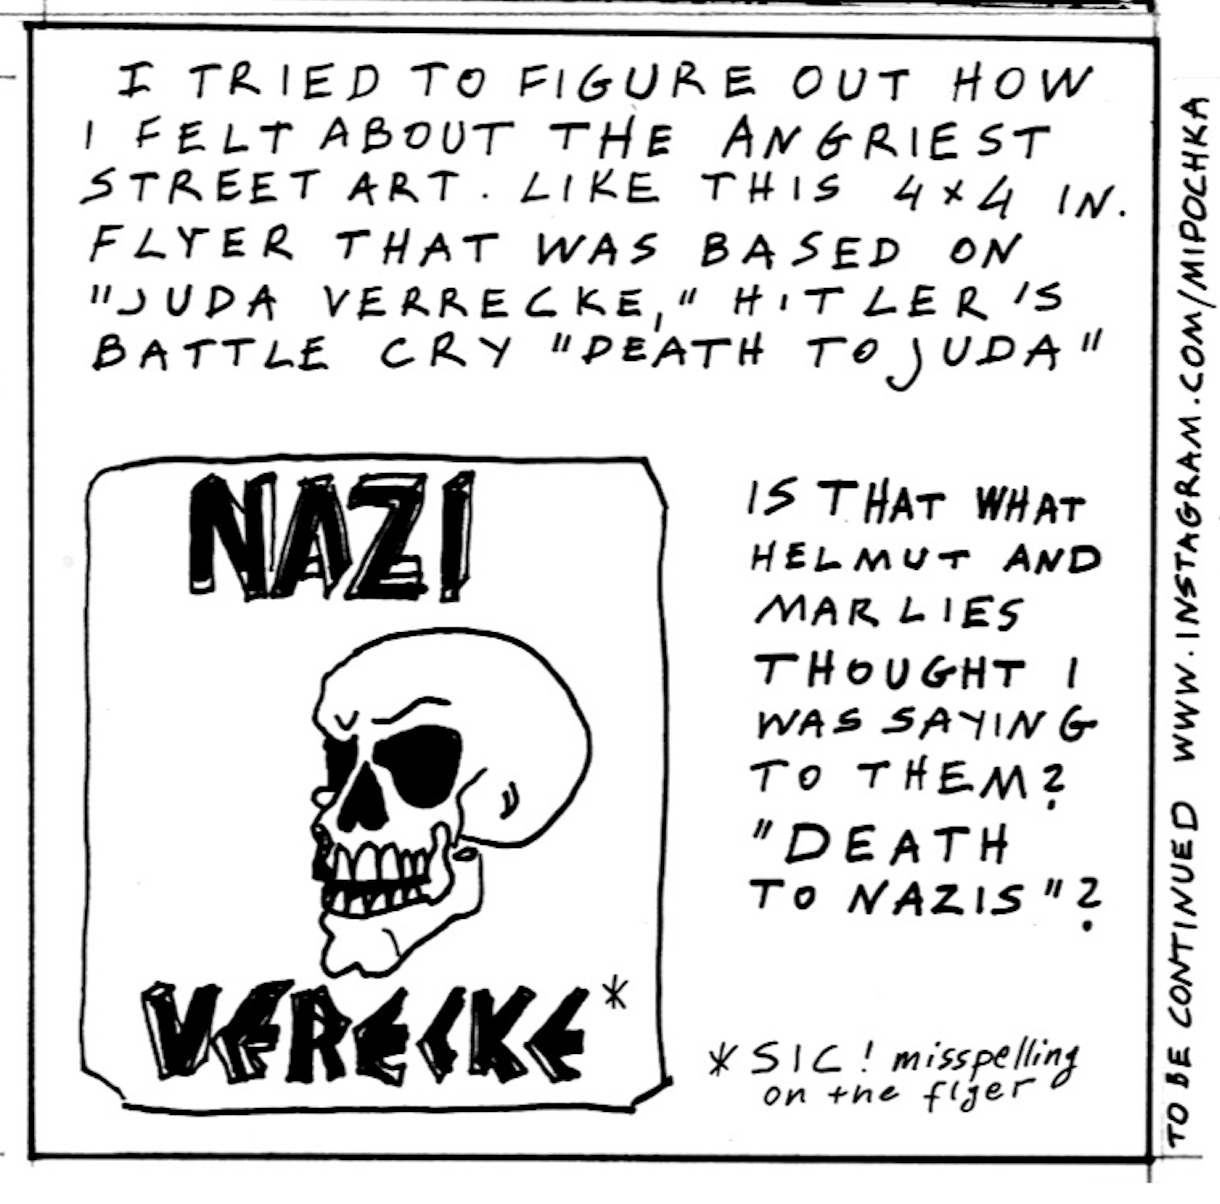 â€œI tried to figure out how I felt about the angriest street art. Like this 4x4 in. flyer that was based on â€˜Juda Verrecke,â€™ Hitlerâ€™s battle cry, â€˜Death to Juda.â€™ Is that was Helmut and Marlies thought I was saying to them? â€˜Death to Nazisâ€™?â€ A flyer shows a skull and reads in bold font, â€œNazi Verecke.â€

â€œTo be continued www.instagram.com/mipochkaâ€